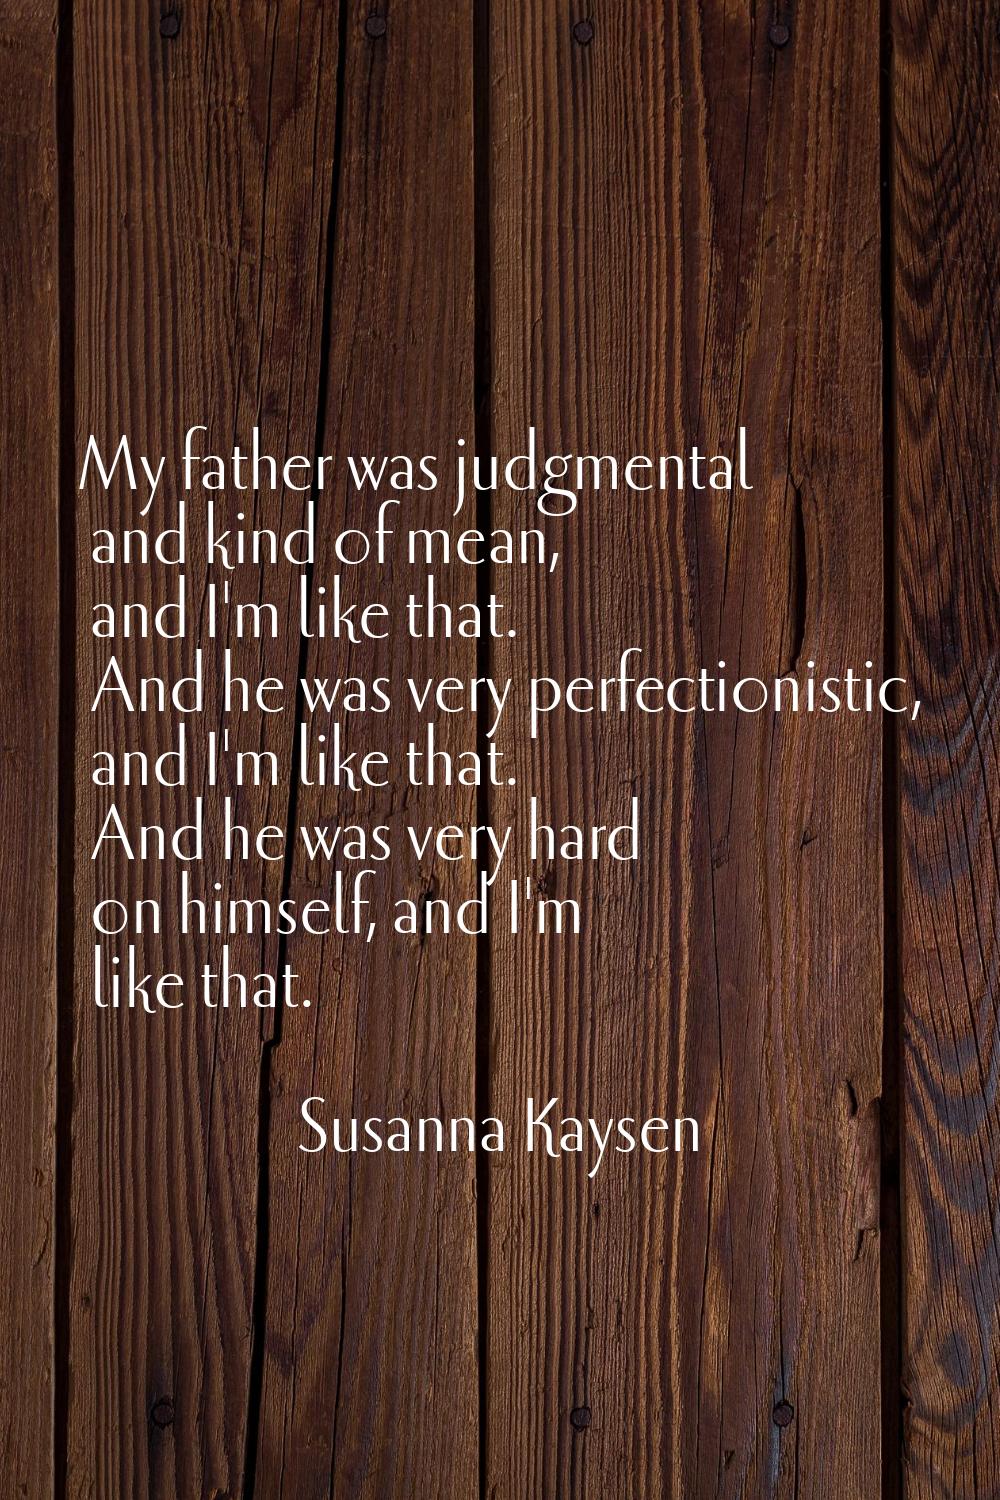 My father was judgmental and kind of mean, and I'm like that. And he was very perfectionistic, and 